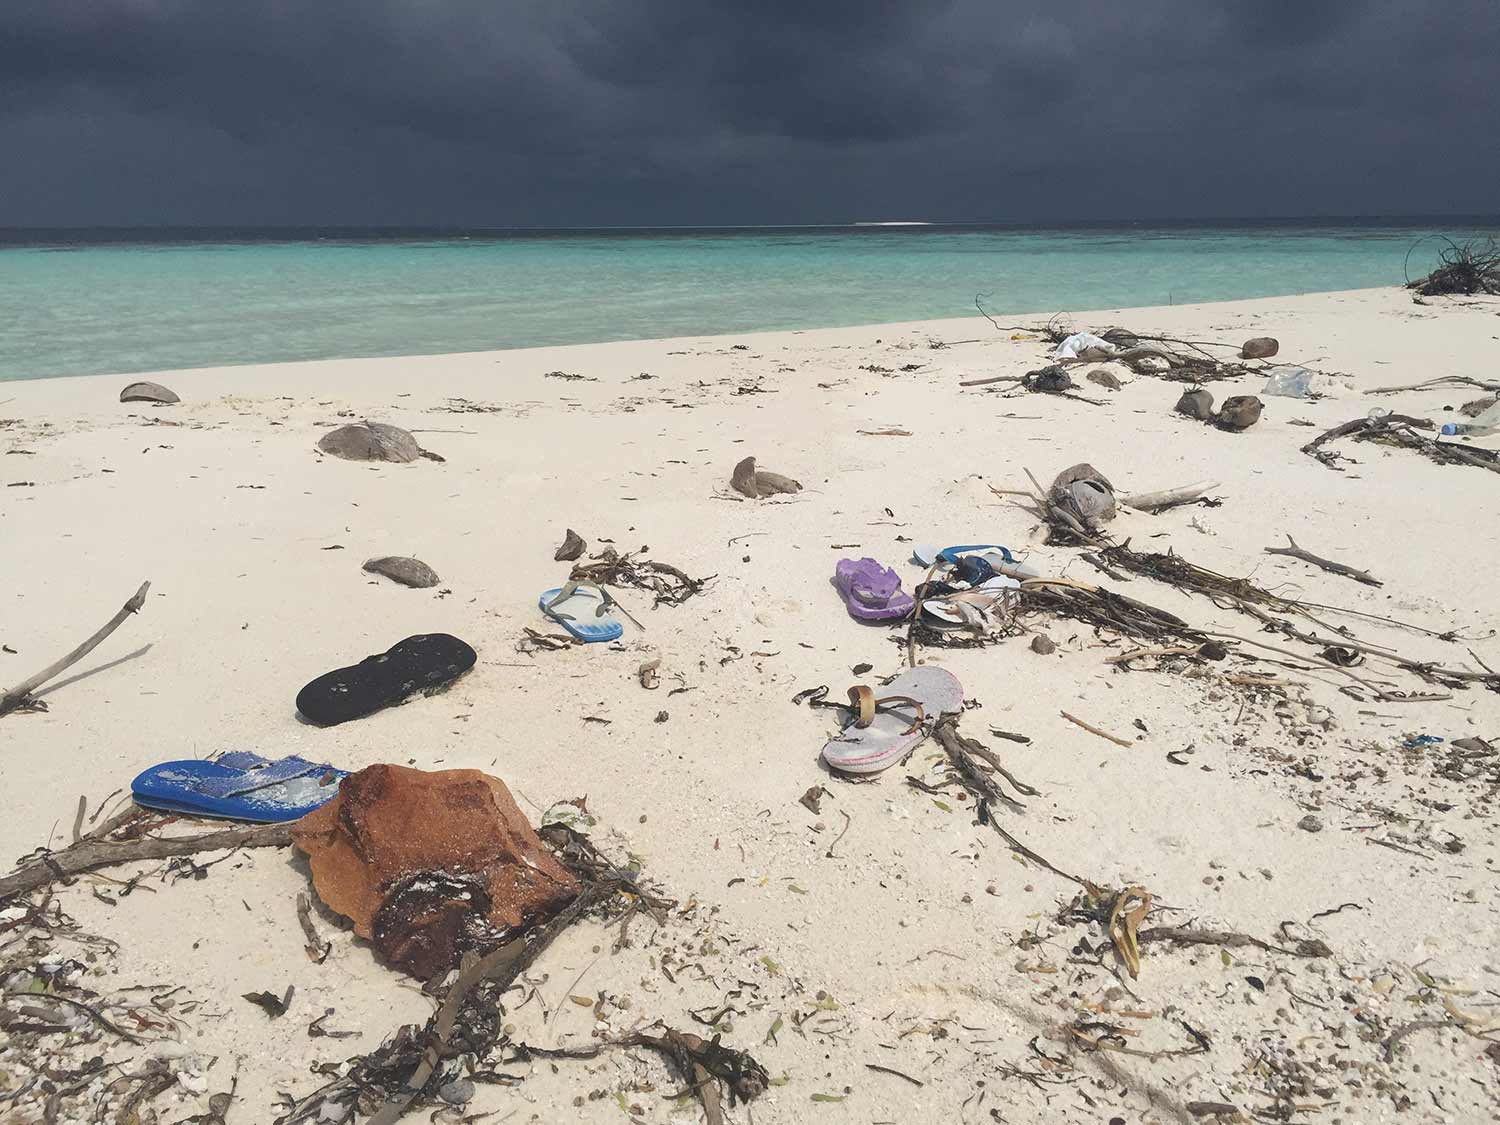 Even a small uninhabited island in the Maldives is marked with human pollution. The flip-flops on this Indian Ocean beach likely came from India or China, more than 1,000 miles away. (Photo courtesy of Stephen Mayfield)